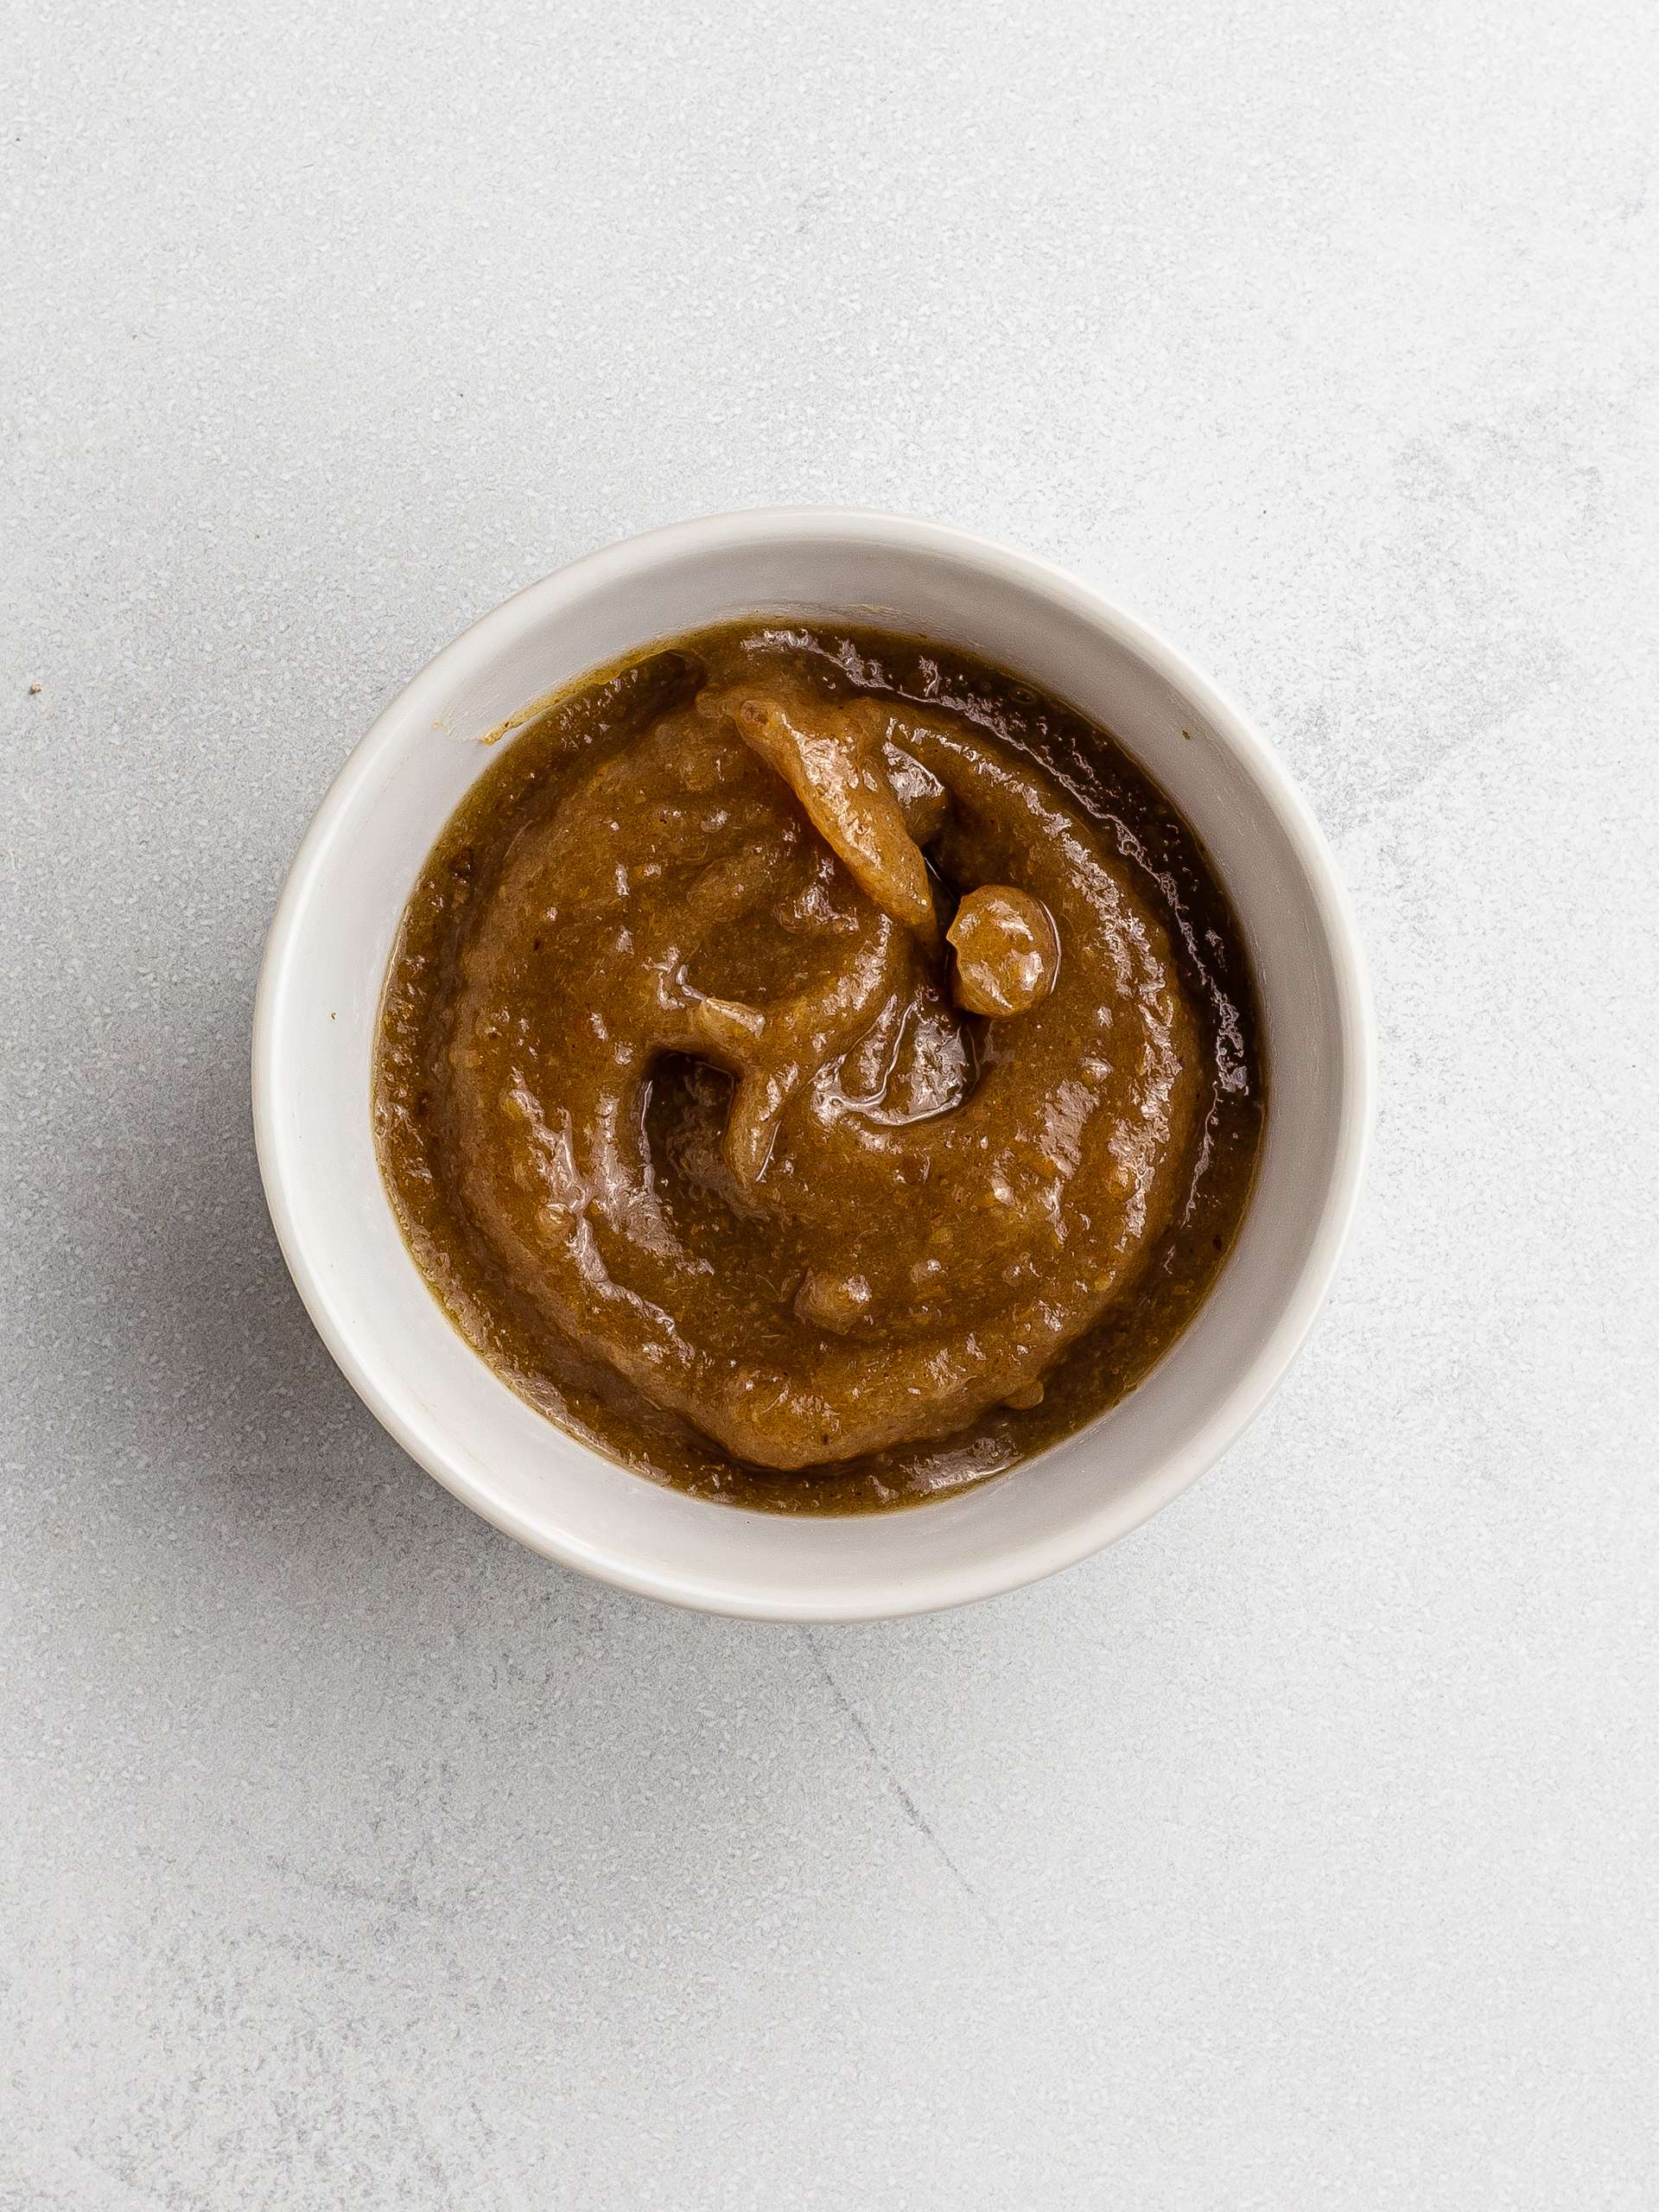 homemade healthy date caramel in a cup